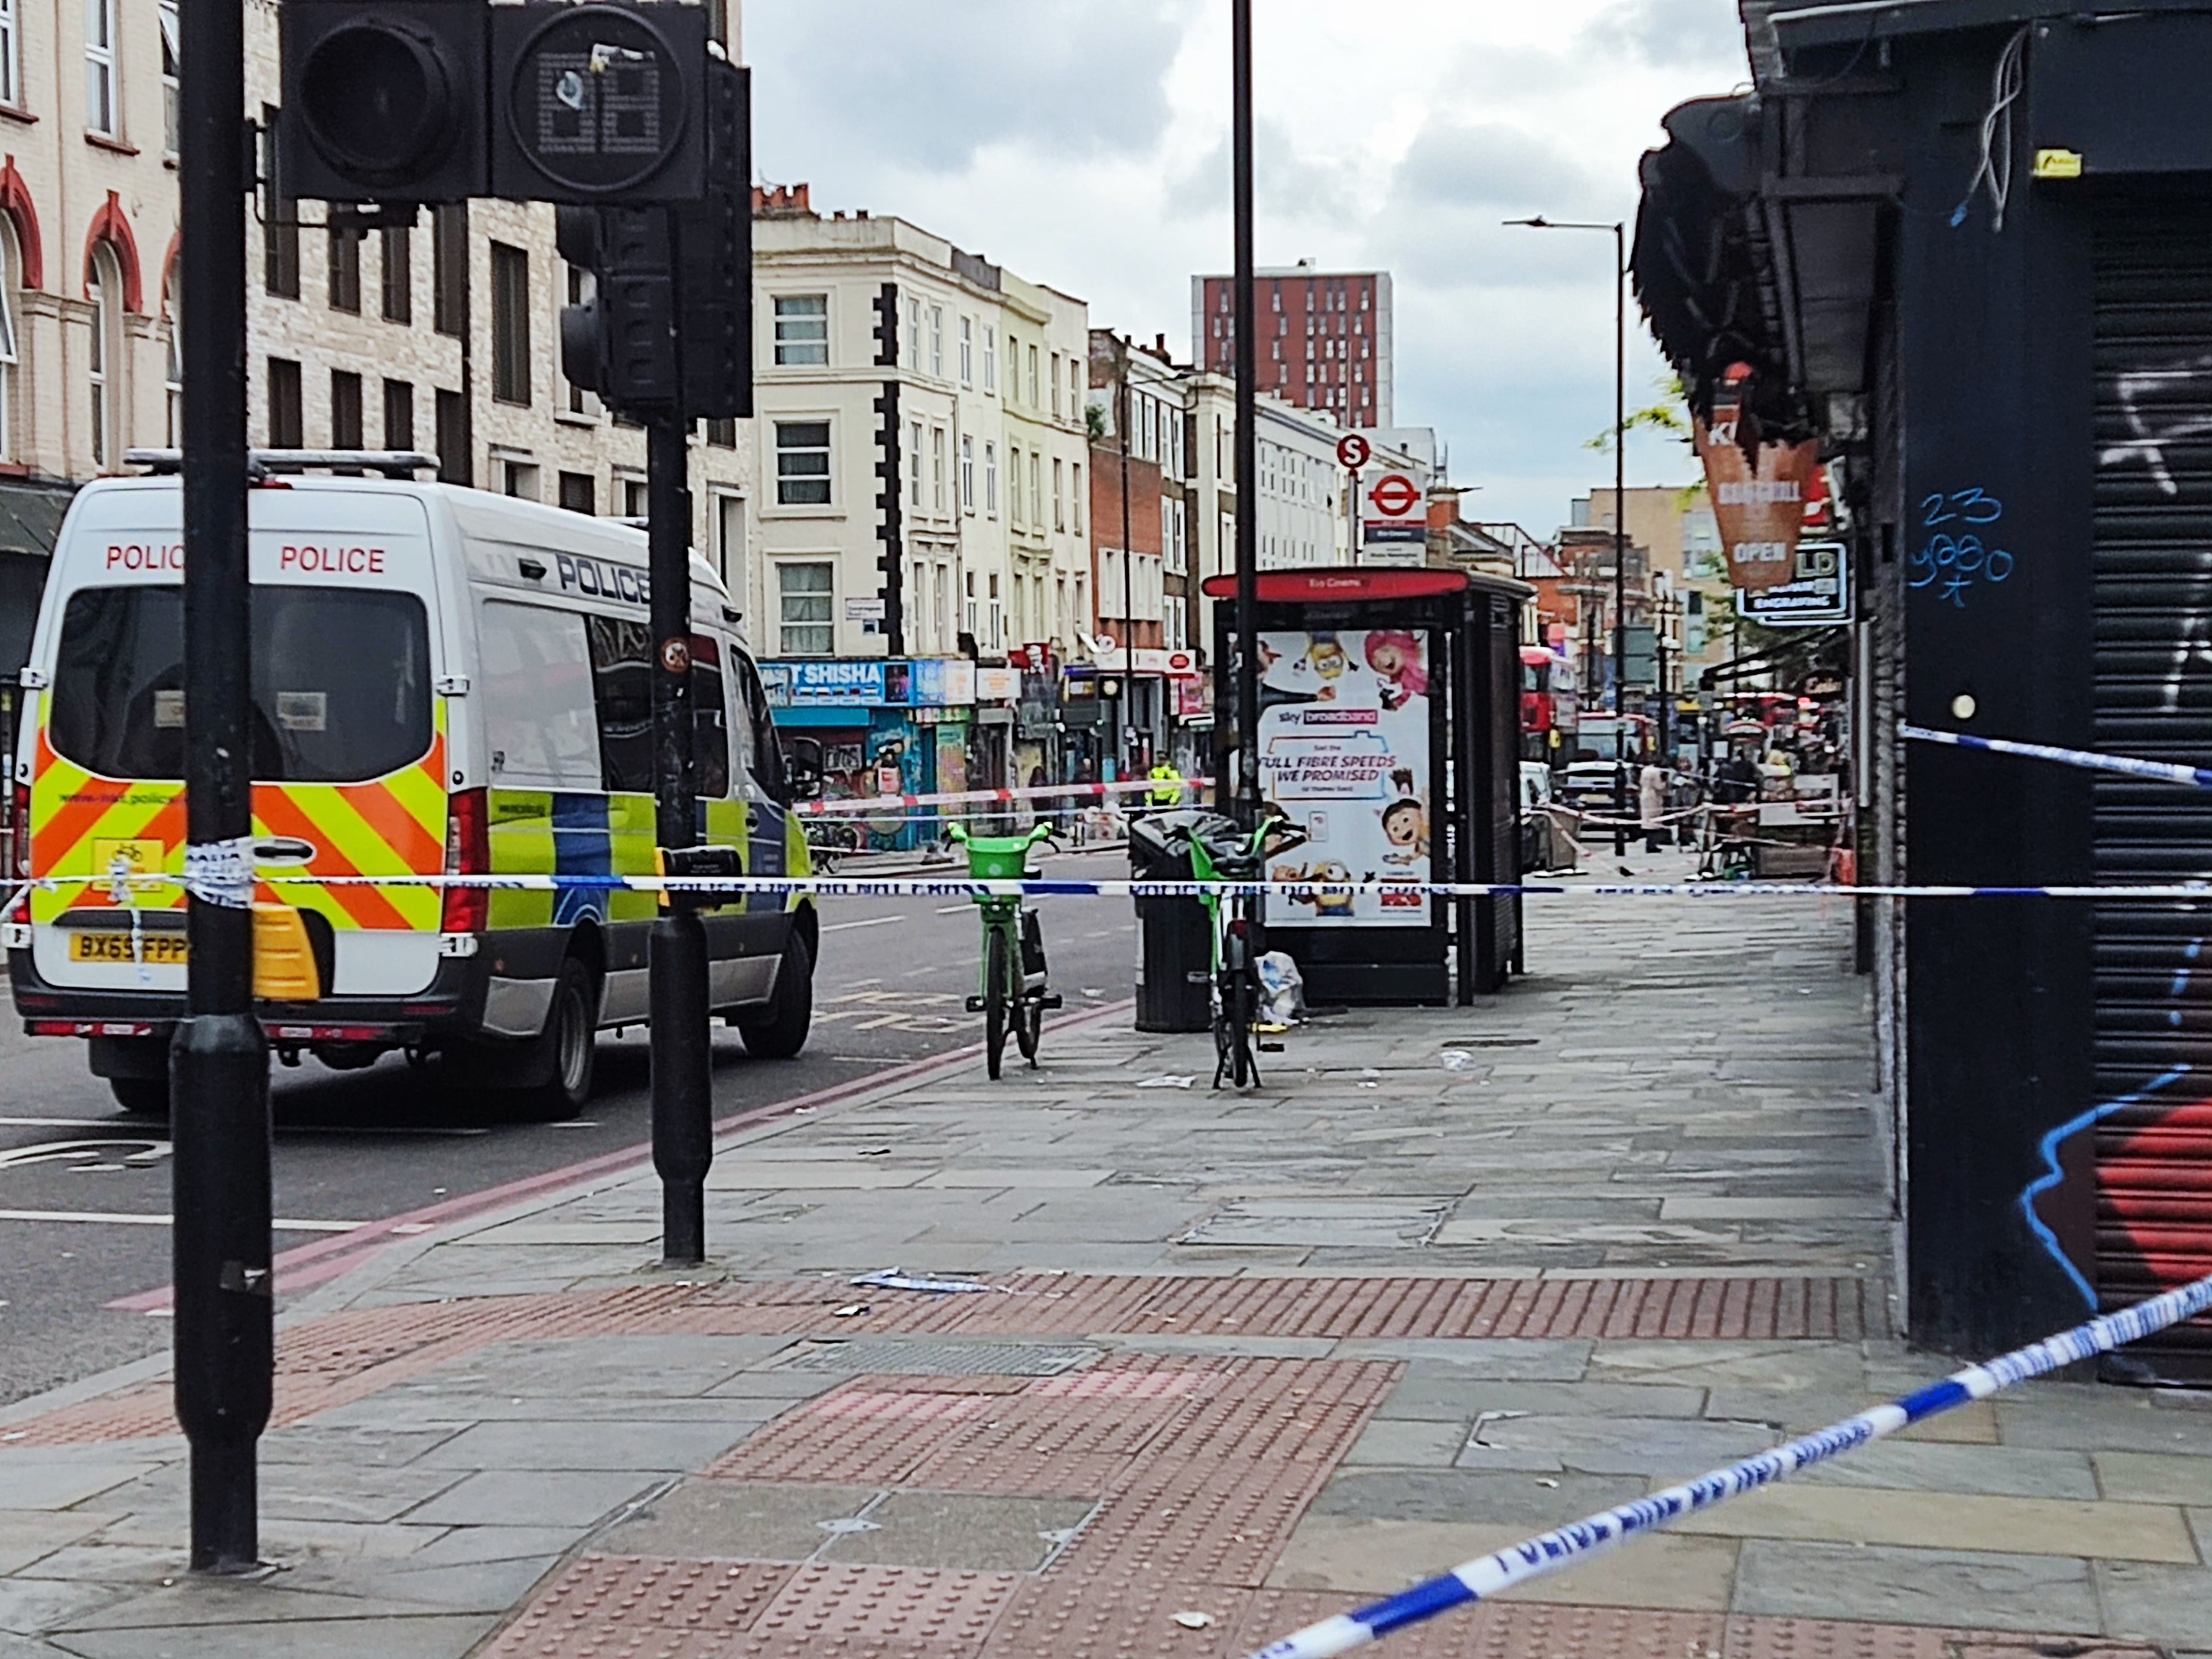 Officers were called at around 9.20pm on Wednesday to reports of the shooting near Evin restaurant on Kingsland High Street